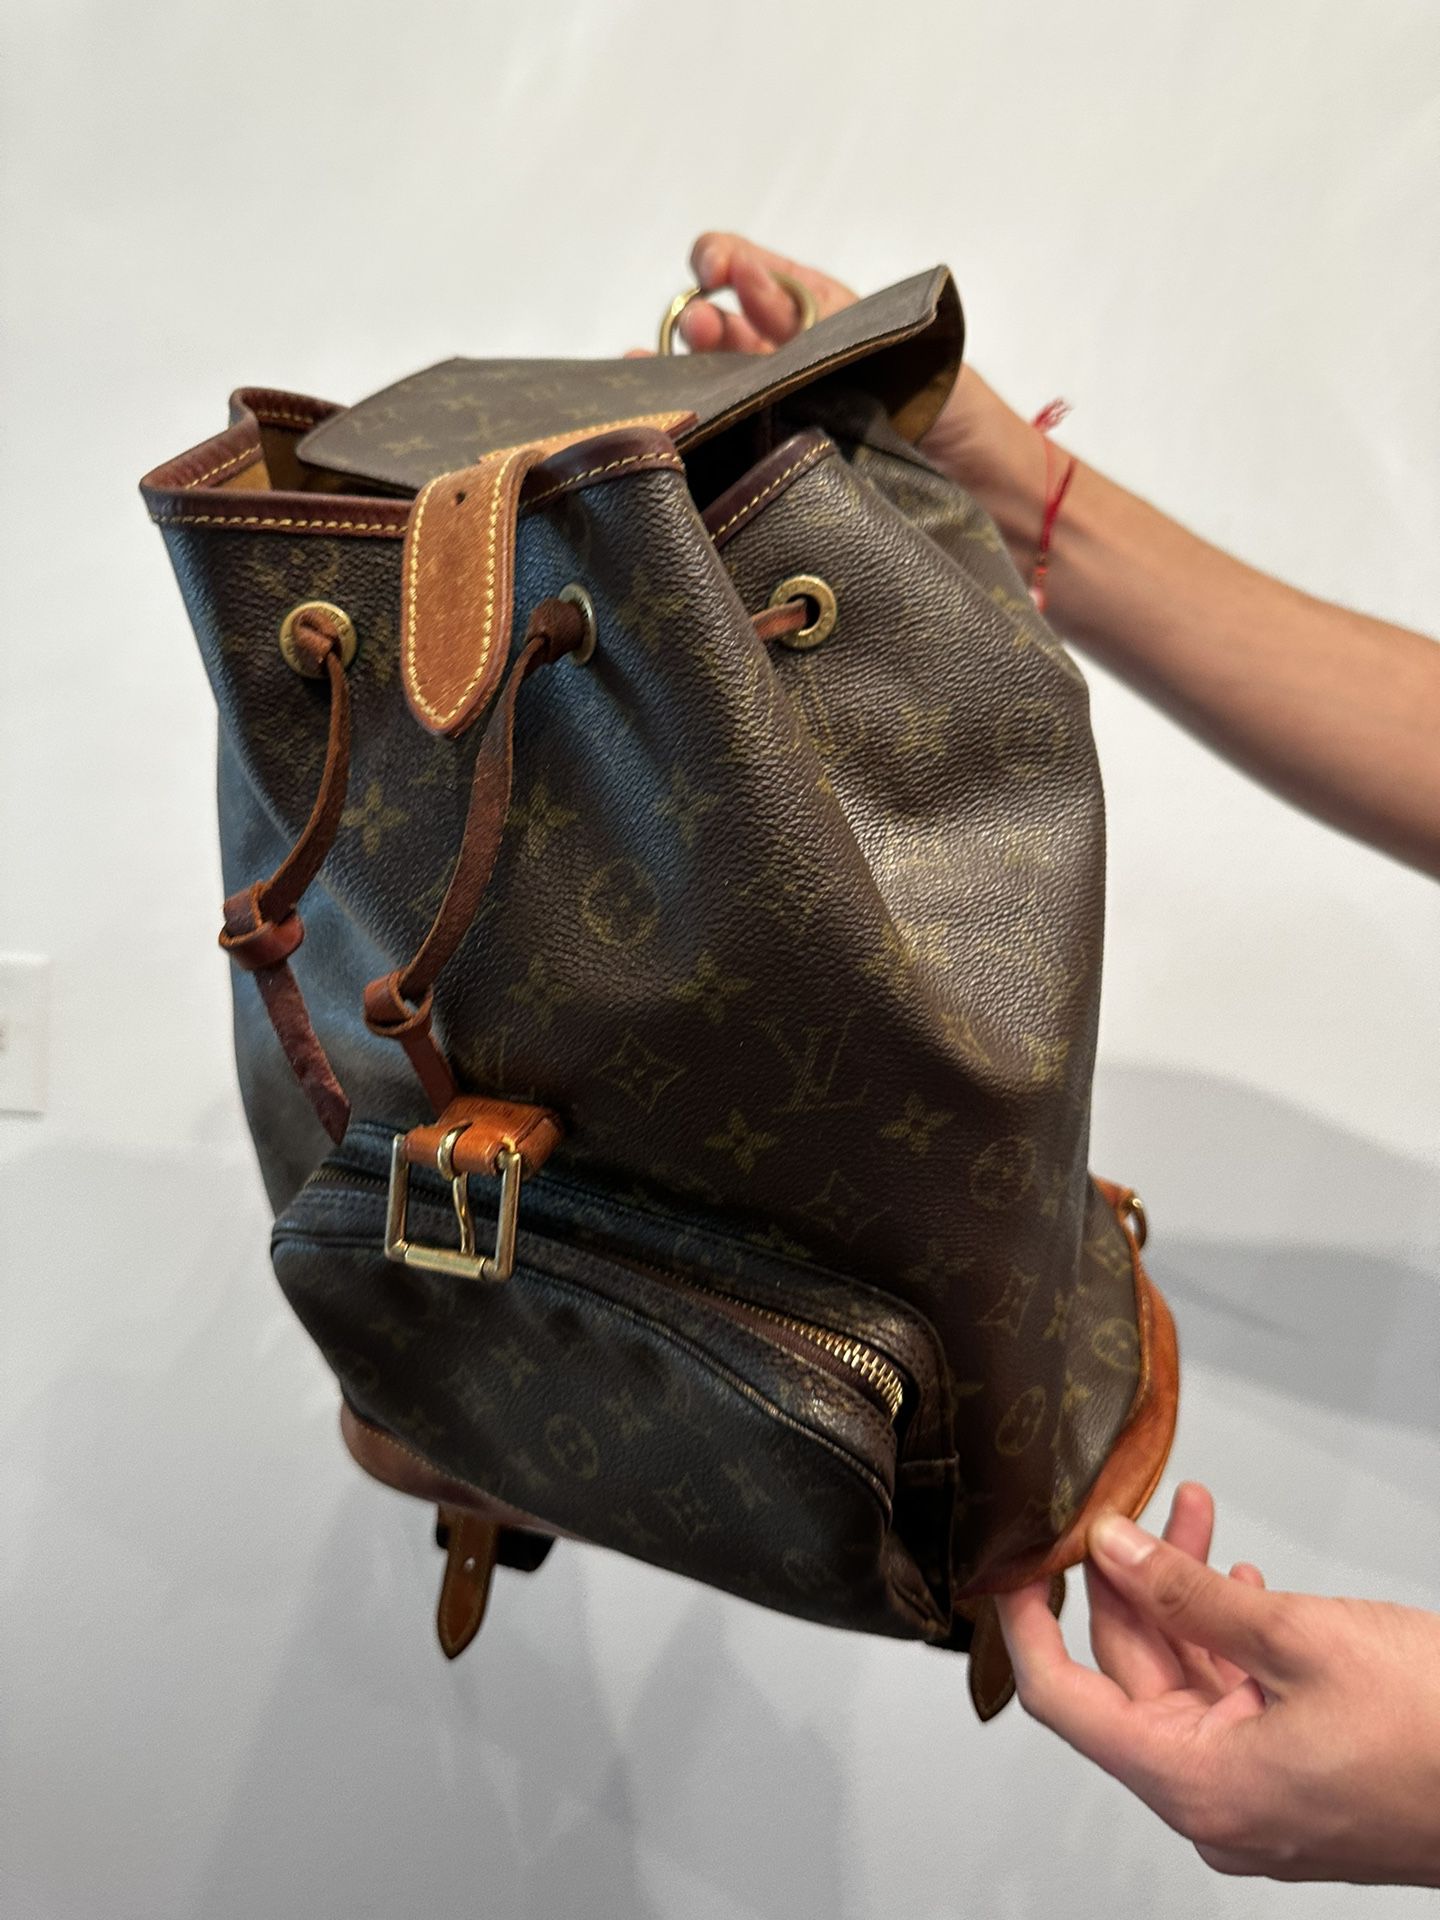 Louis Vuitton Montsouris Monogram Empreinte Backpack for Sale in Akron, OH  - OfferUp